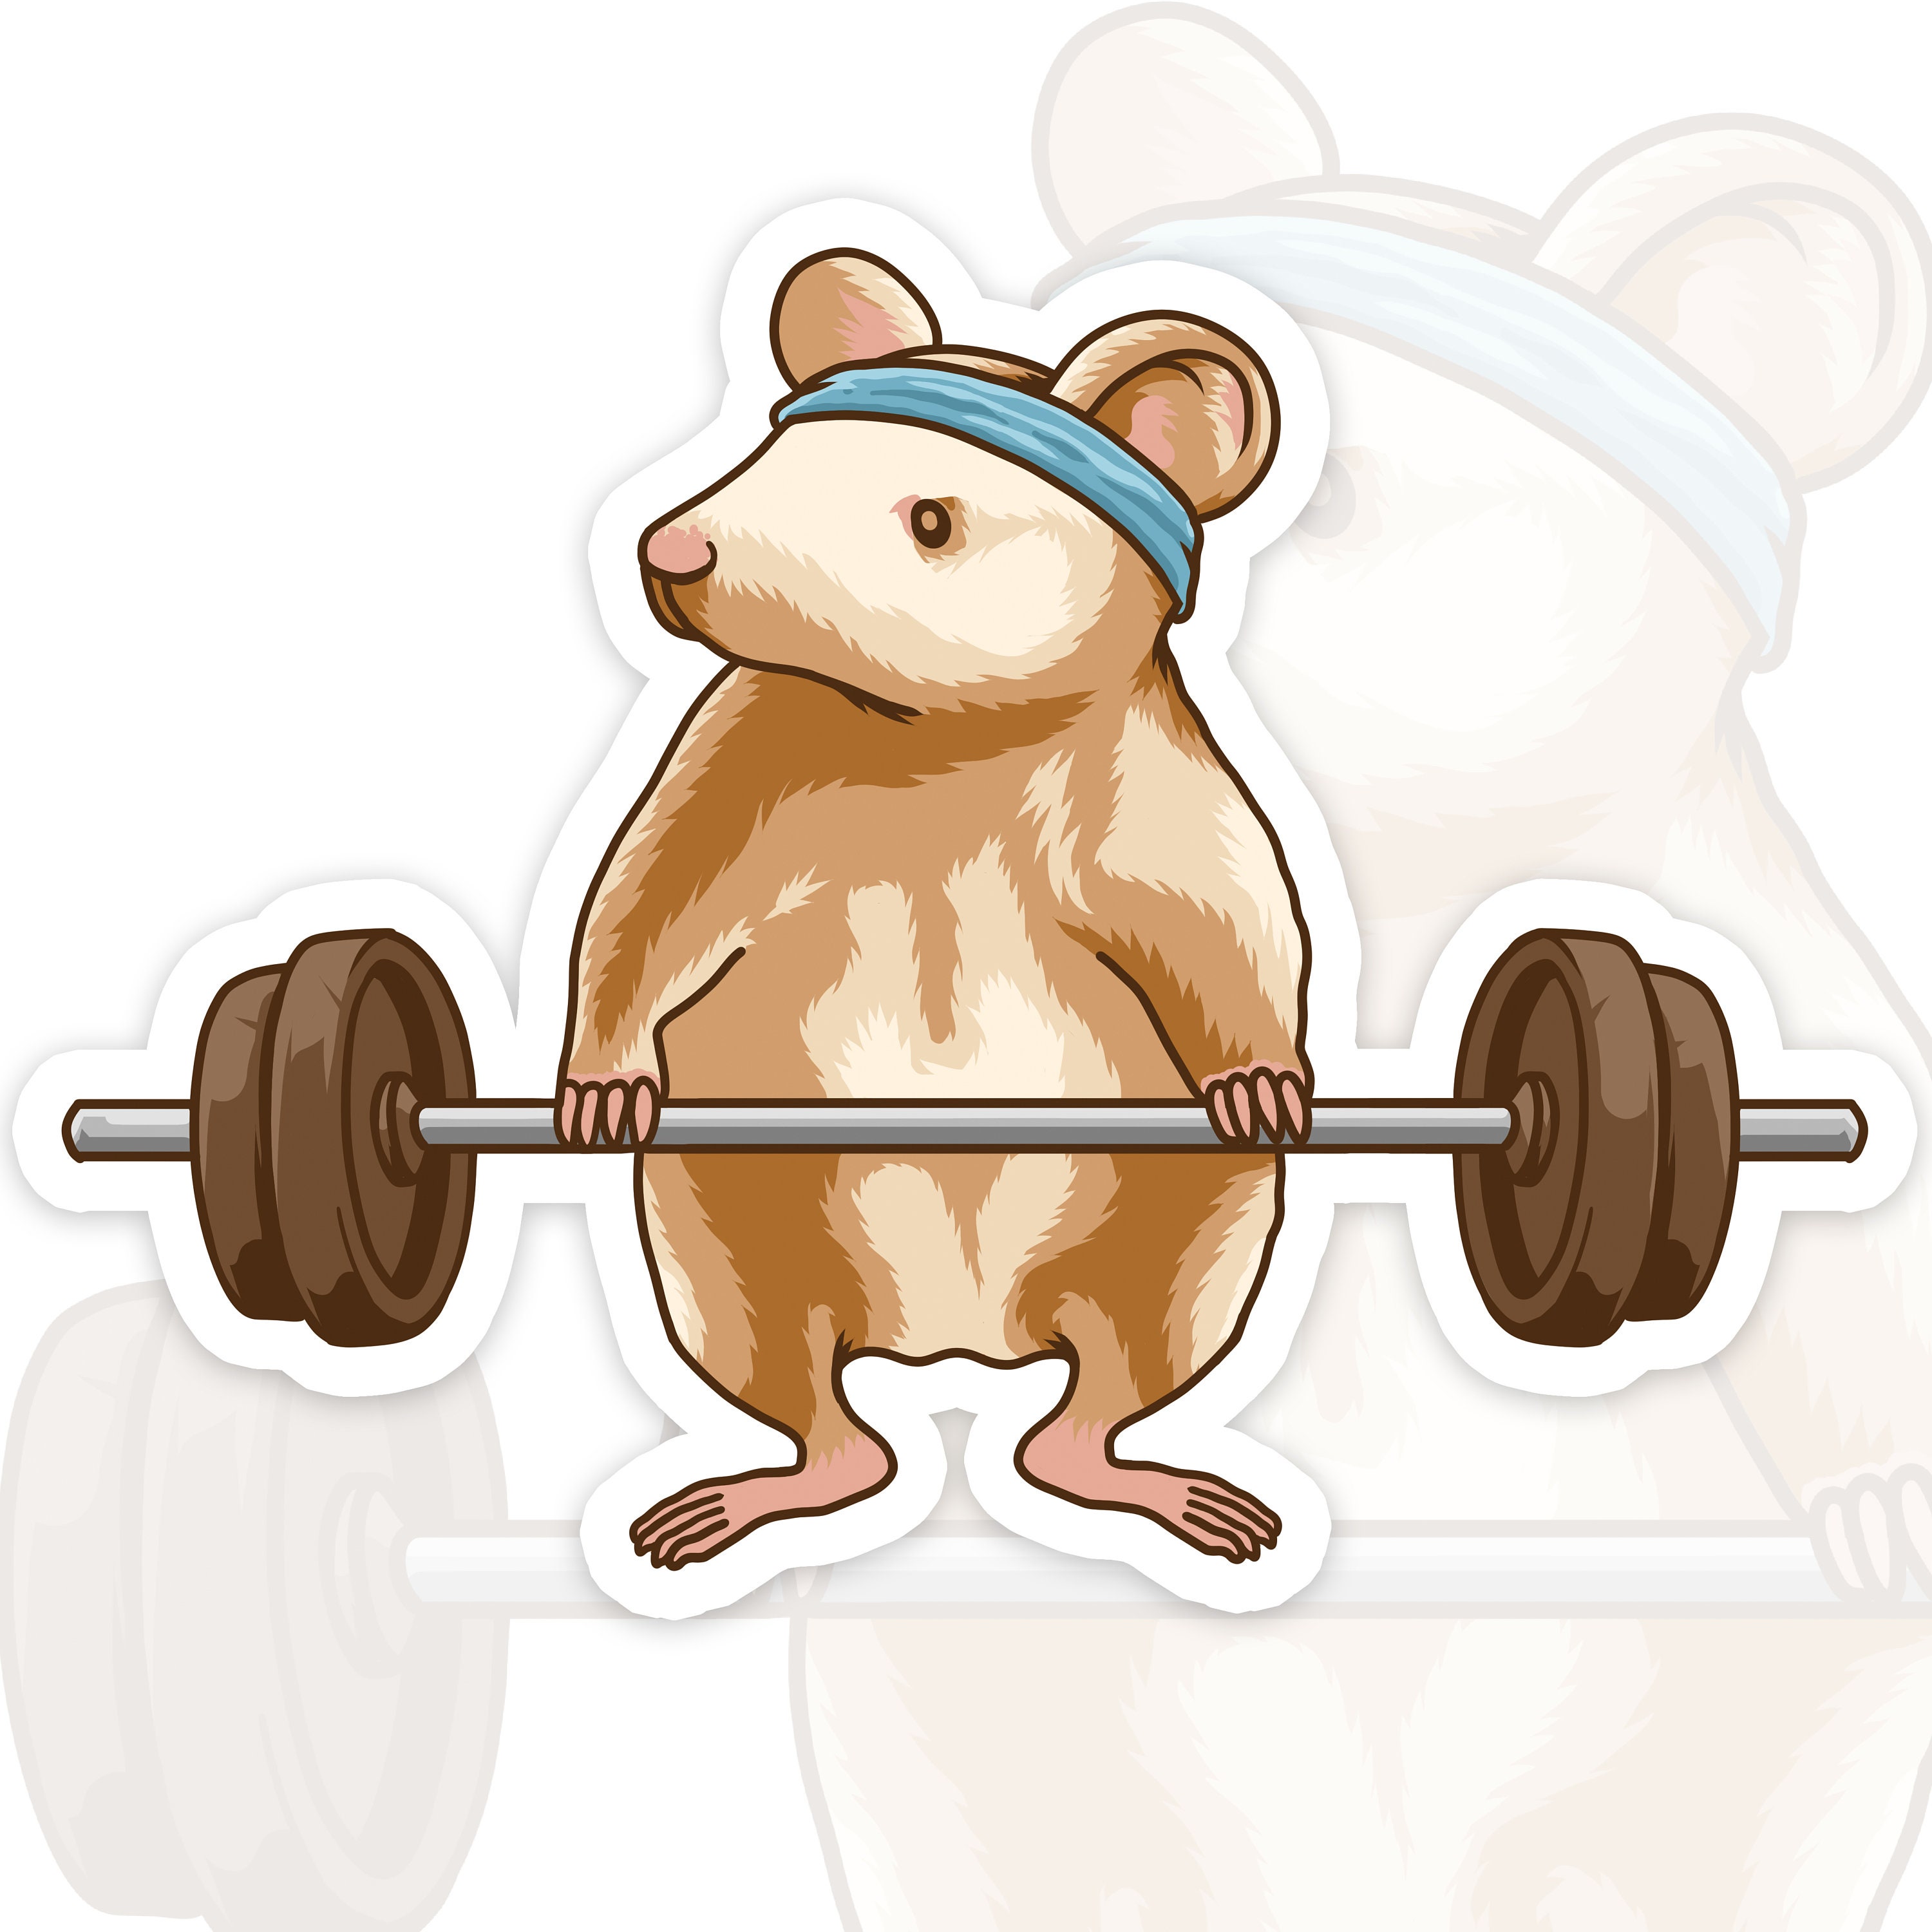 Cute Gym Rat Deadlifting Sticker for Sale by ThumboArtBumbo